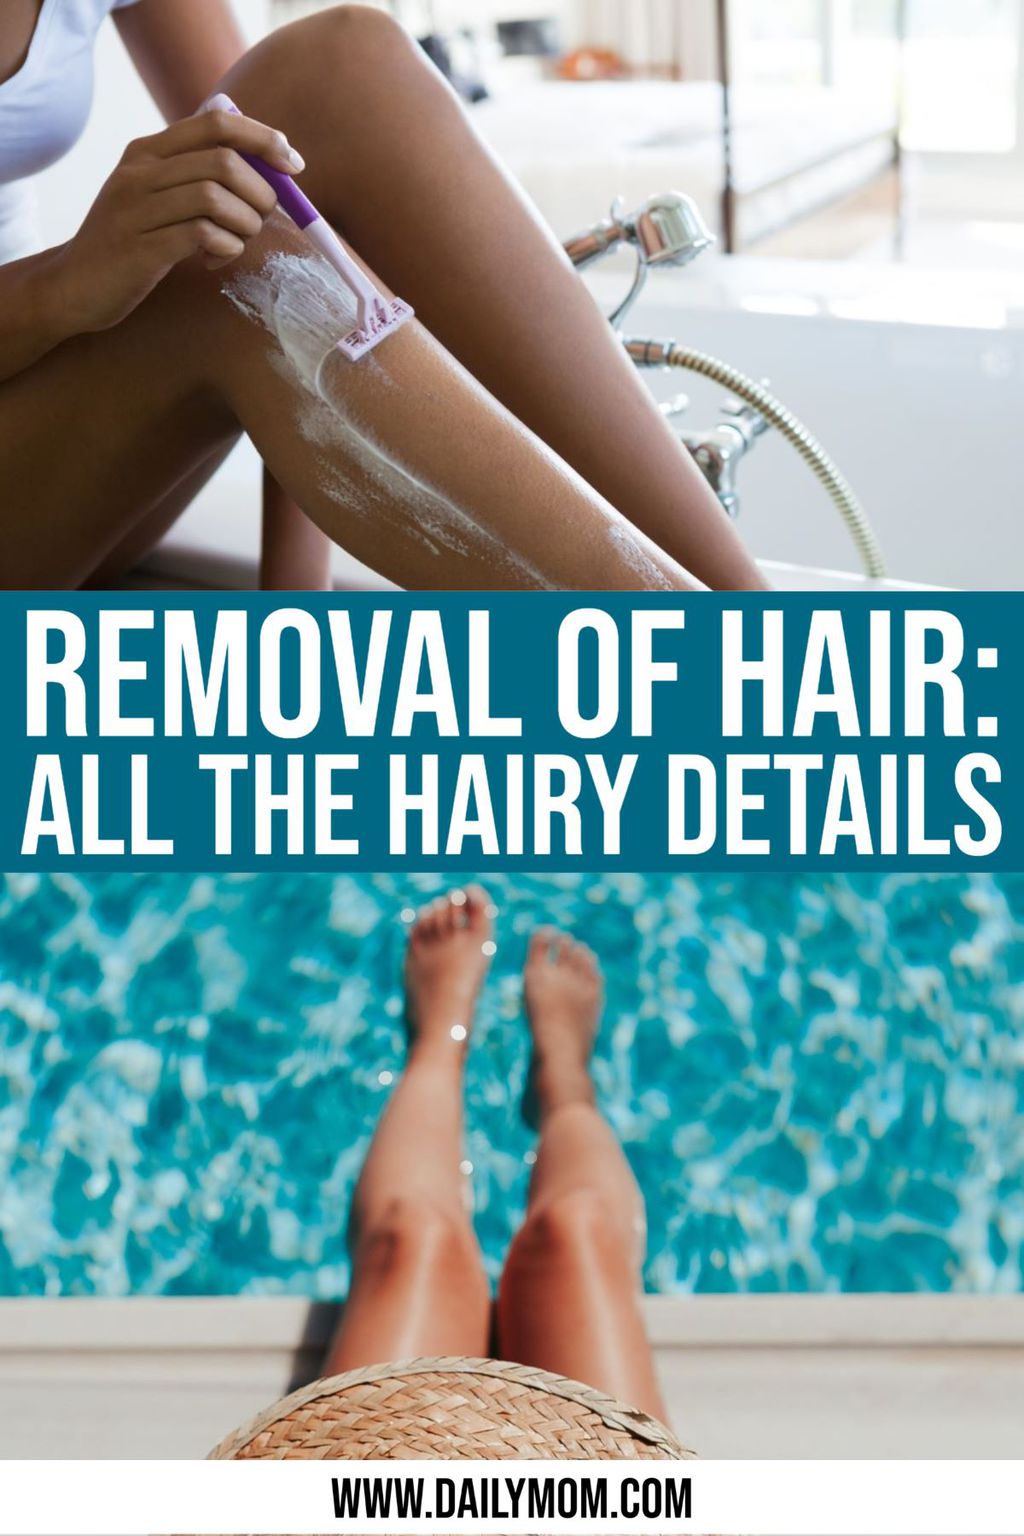 7 Options For Removal Of Hair: All The Hairy Details